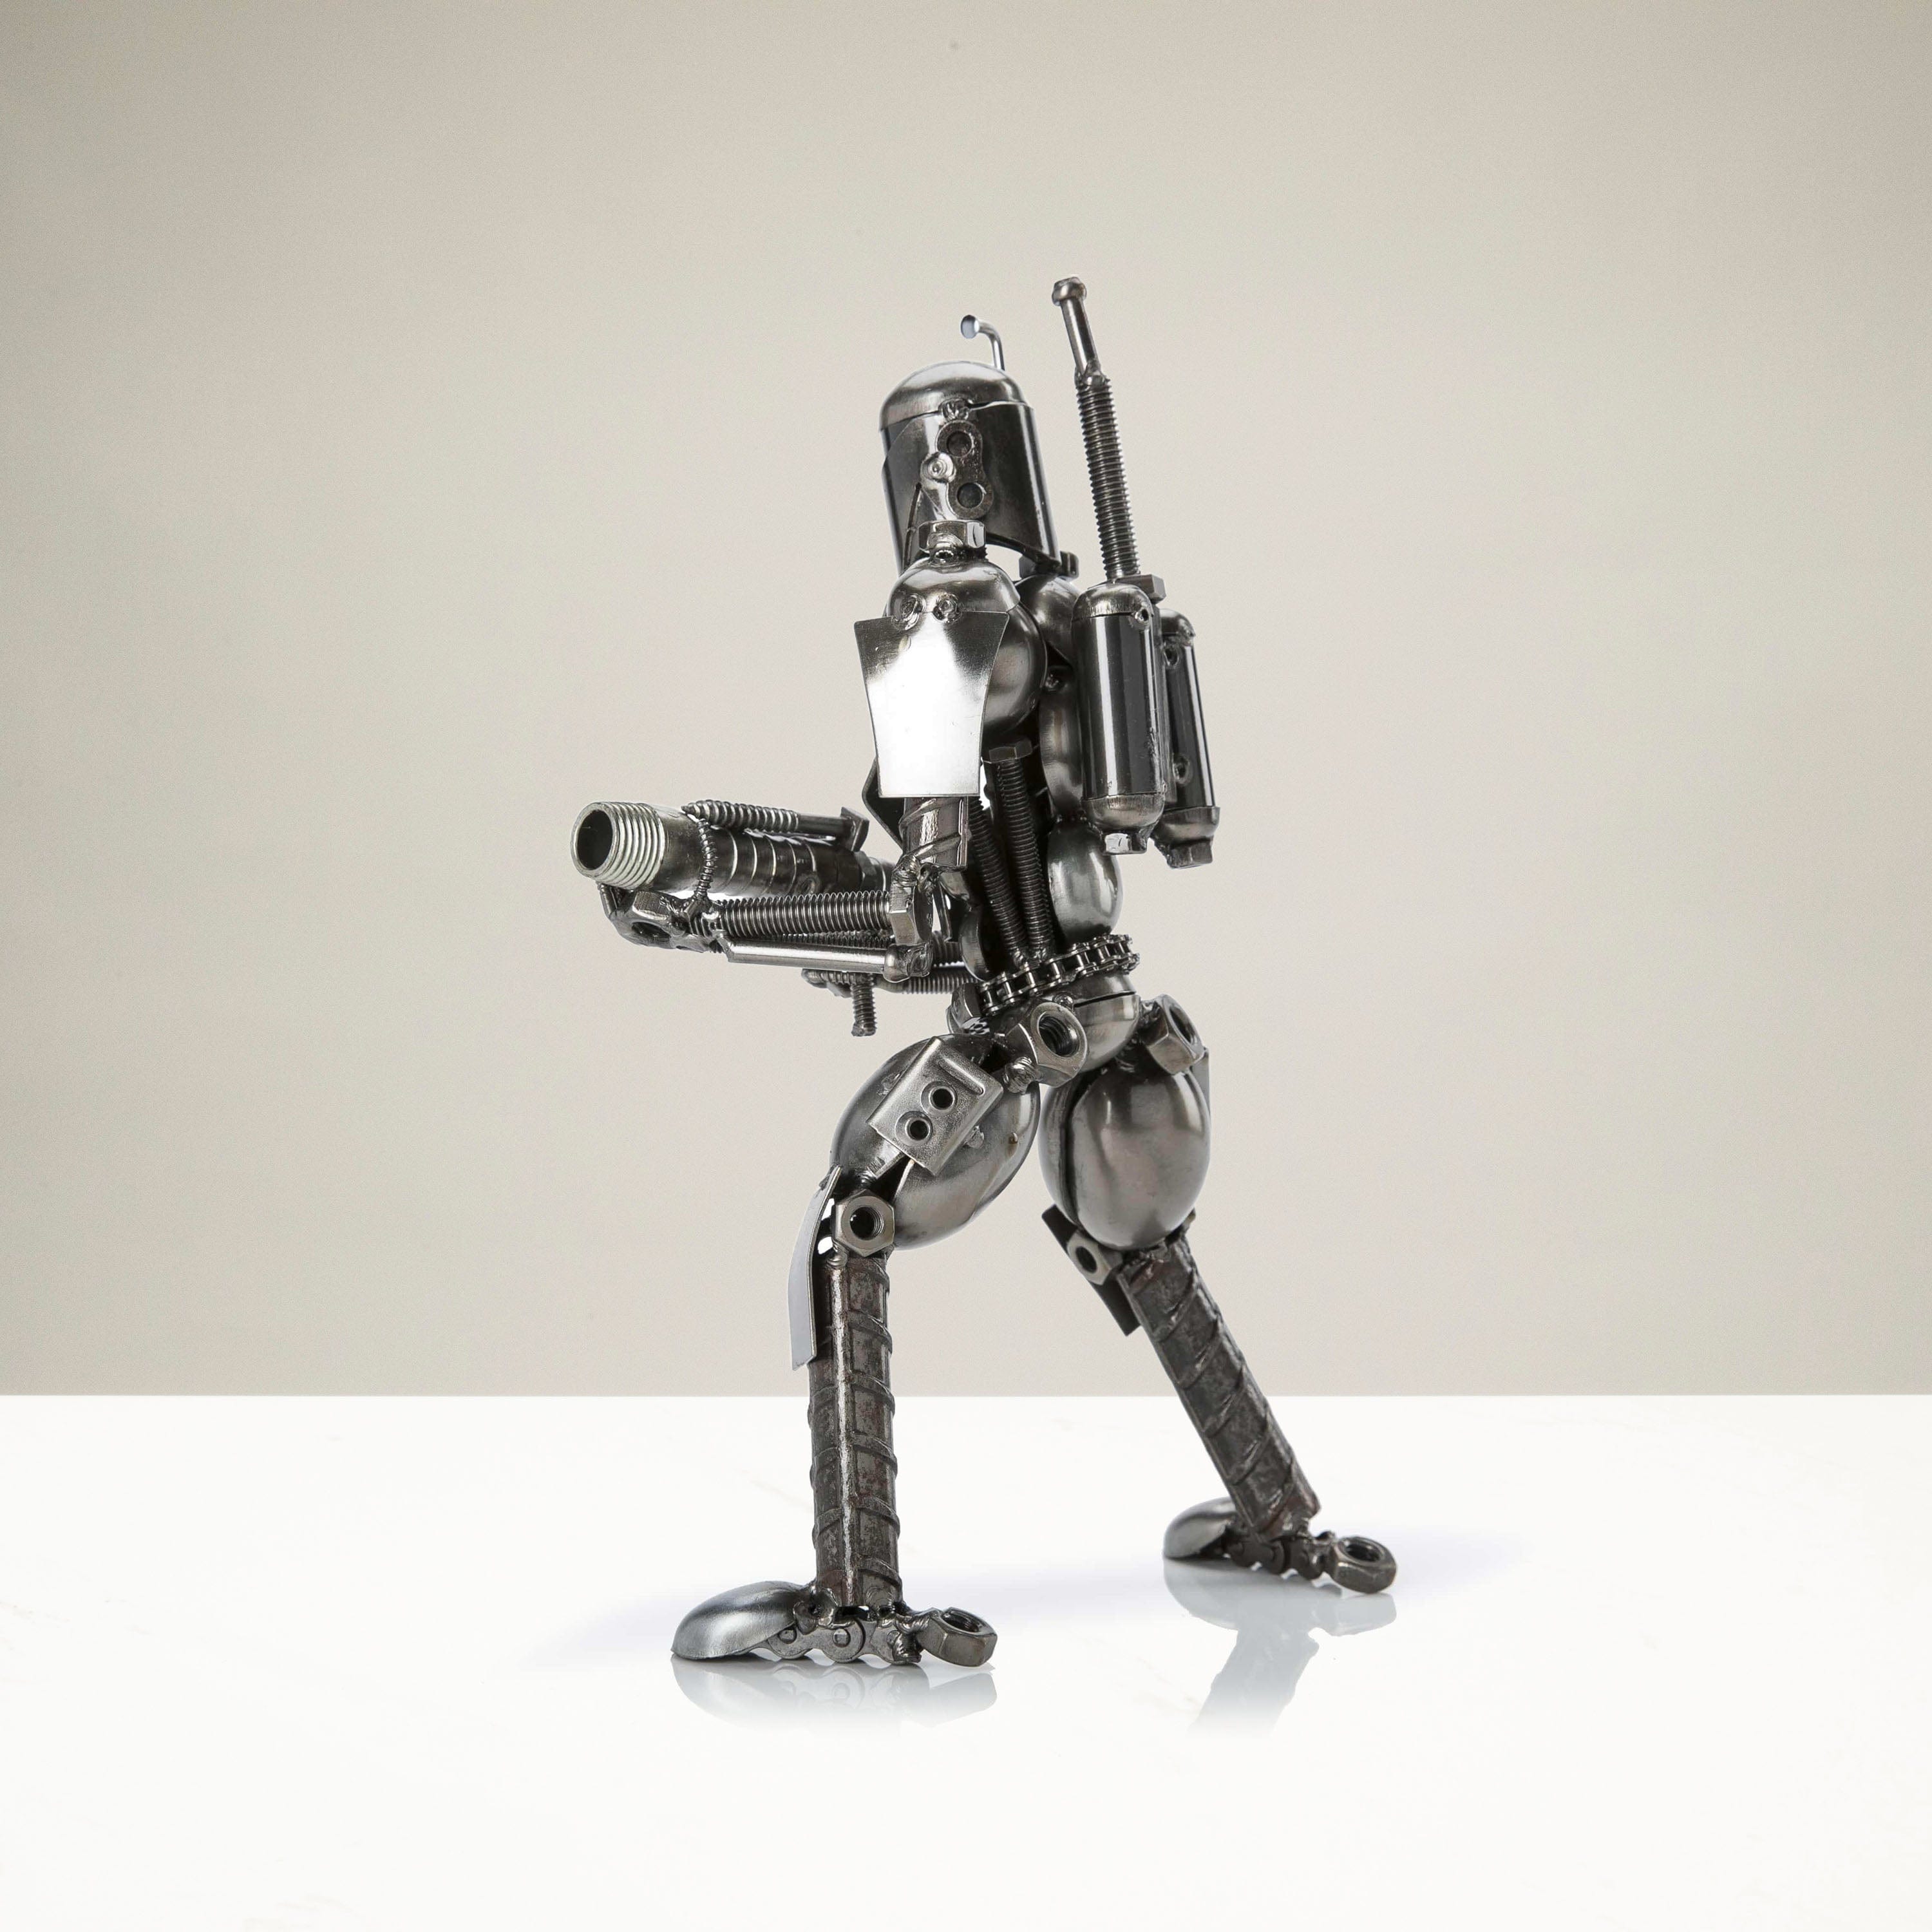 Kalifano Recycled Metal Art Jango Fett with Blaster Inspired Recycled Metal Sculpture RMS-700JFA-N